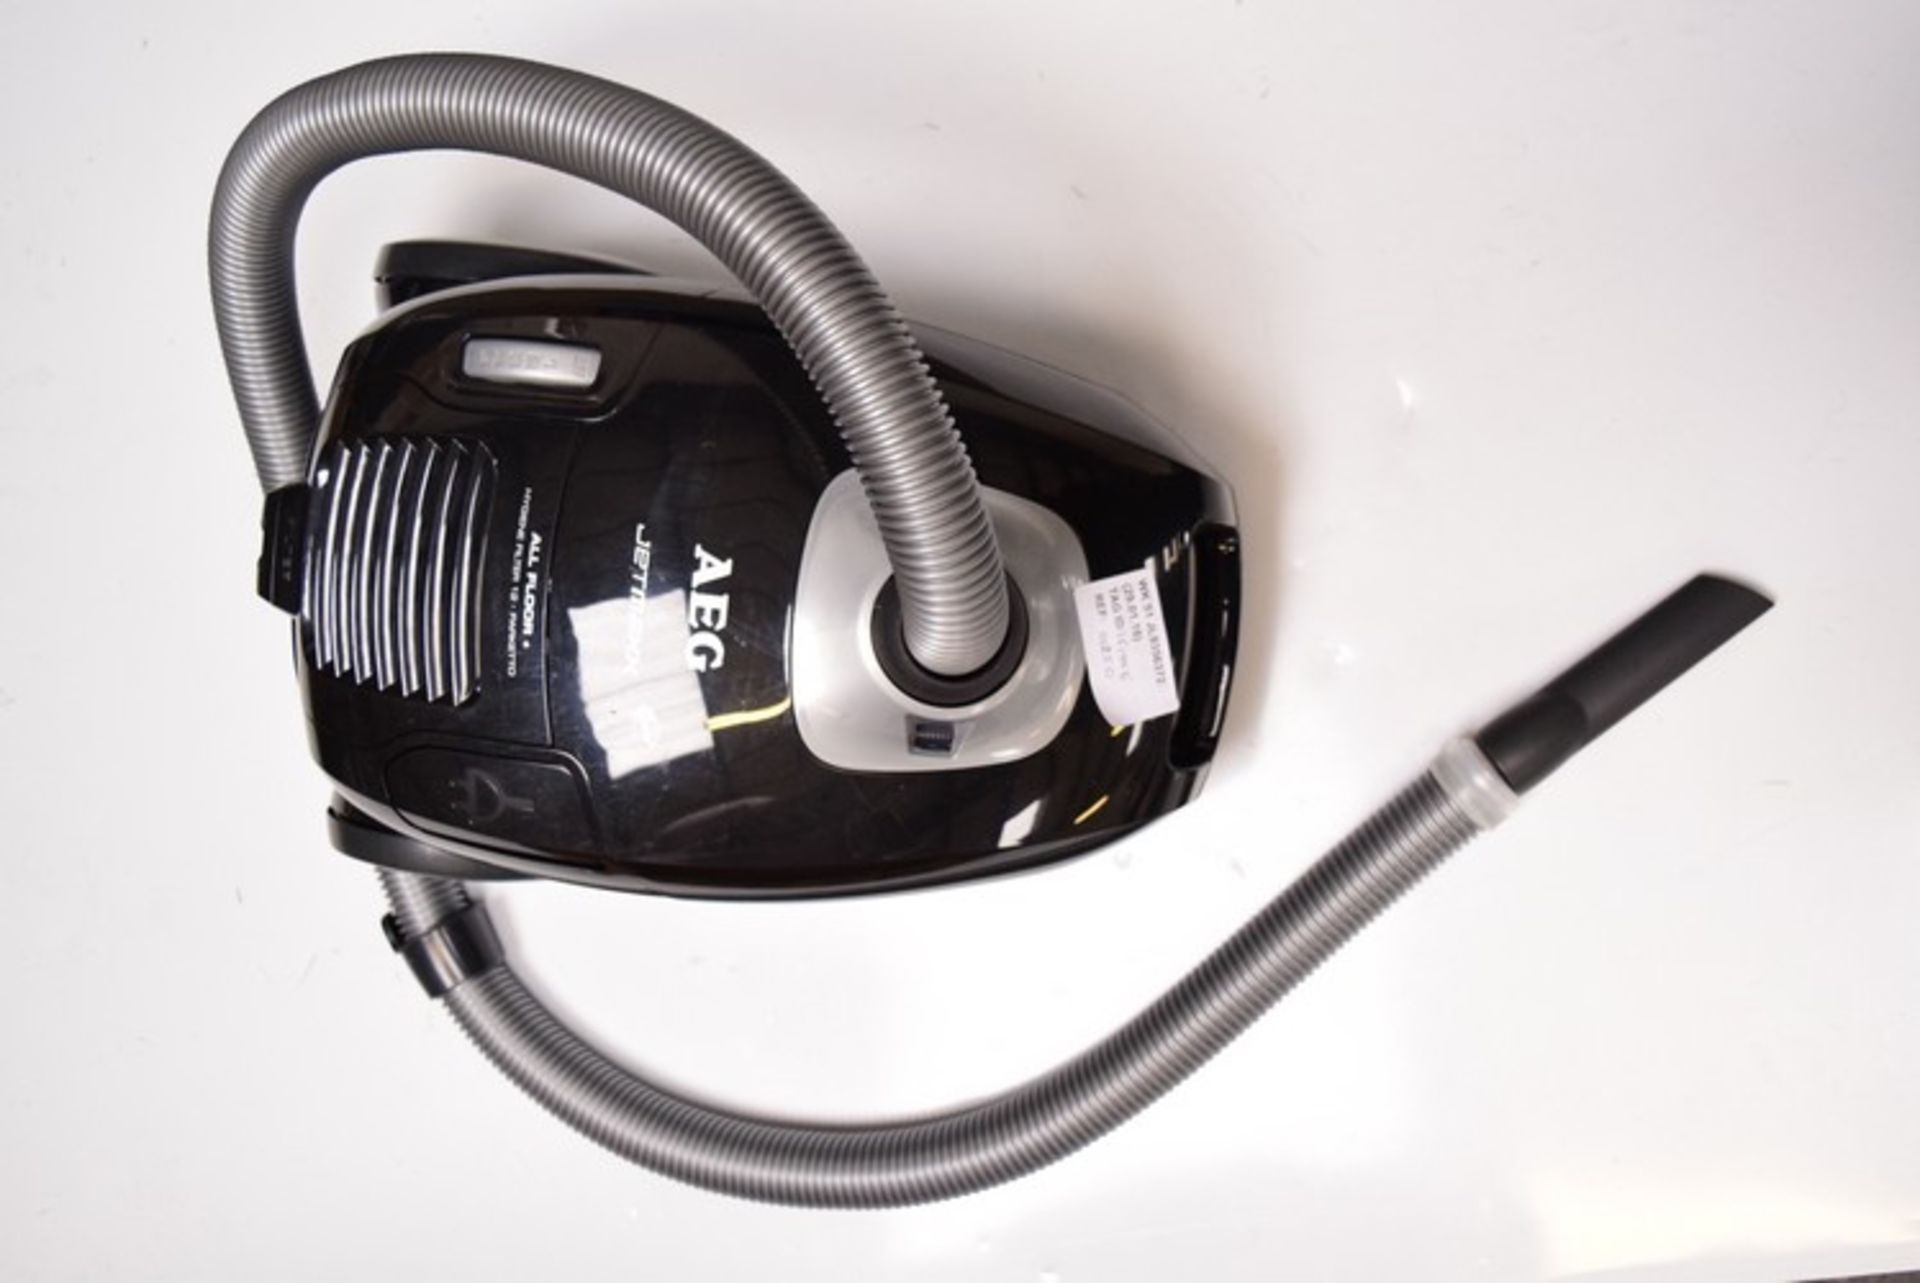 1 x AEG VACUUM CLEANER RRP £125 29.01.18 151995 *PLEASE NOTE THAT THE BID PRICE IS MULTIPLIED BY THE